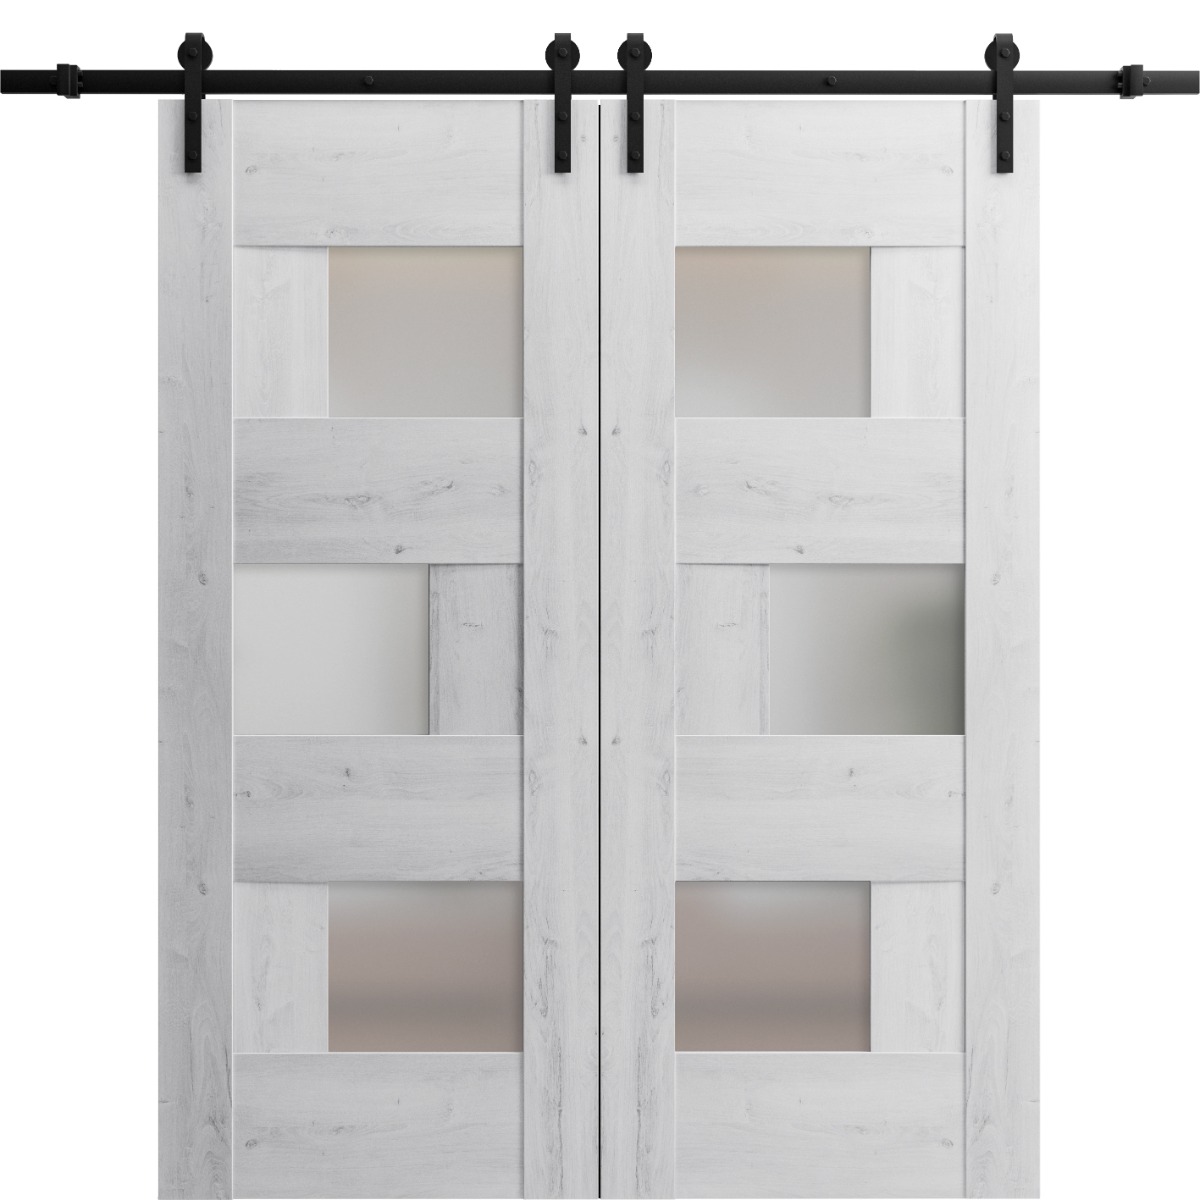 Sturdy Double Barn Door with Frosted Glass | Sete 6933 Nordic White | 13FT Rail Hangers Heavy Set | Solid Panel Interior Doors-64